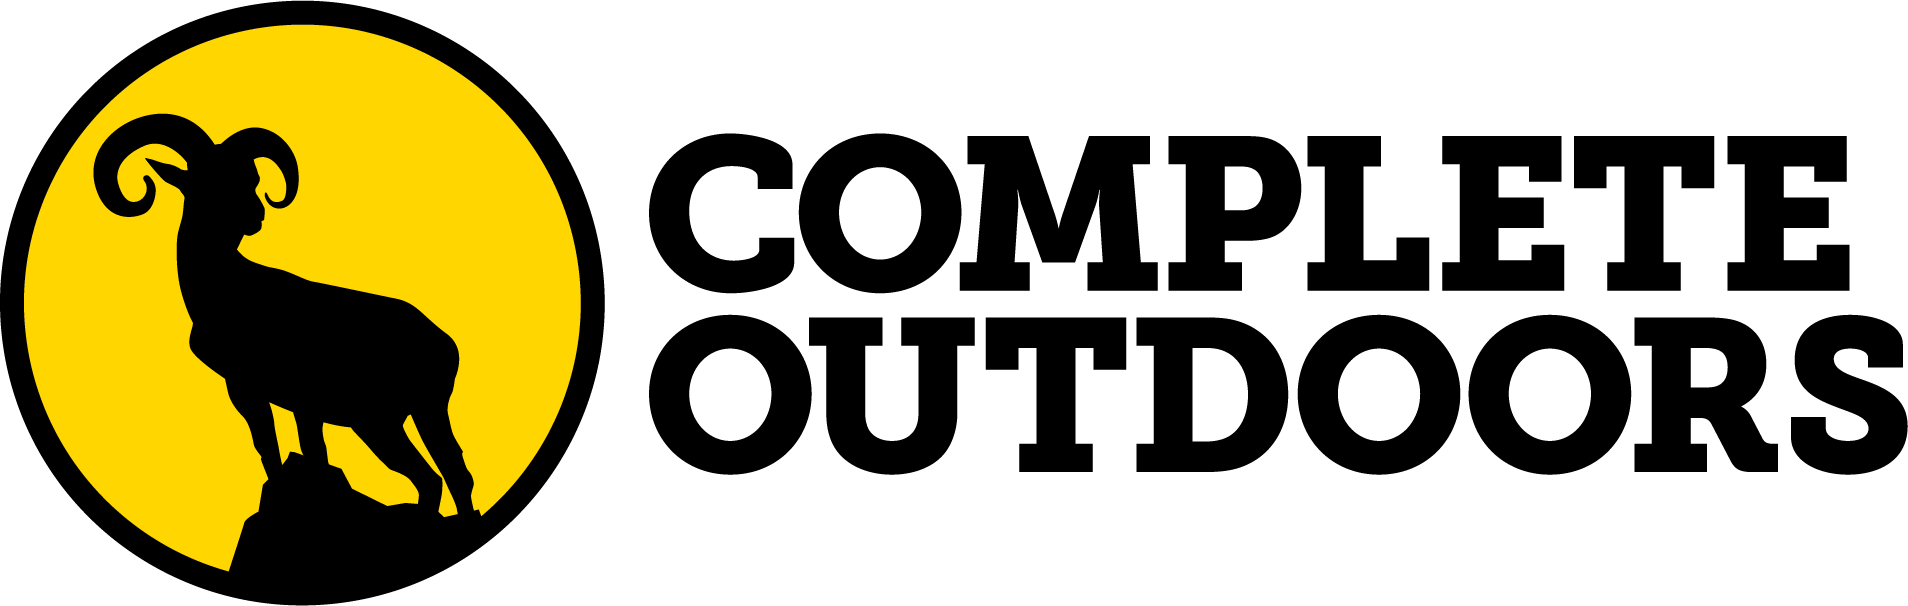 Outdoor Gear Logo - Outdoor Shop & Camping Gear Store - Complete Outdoors